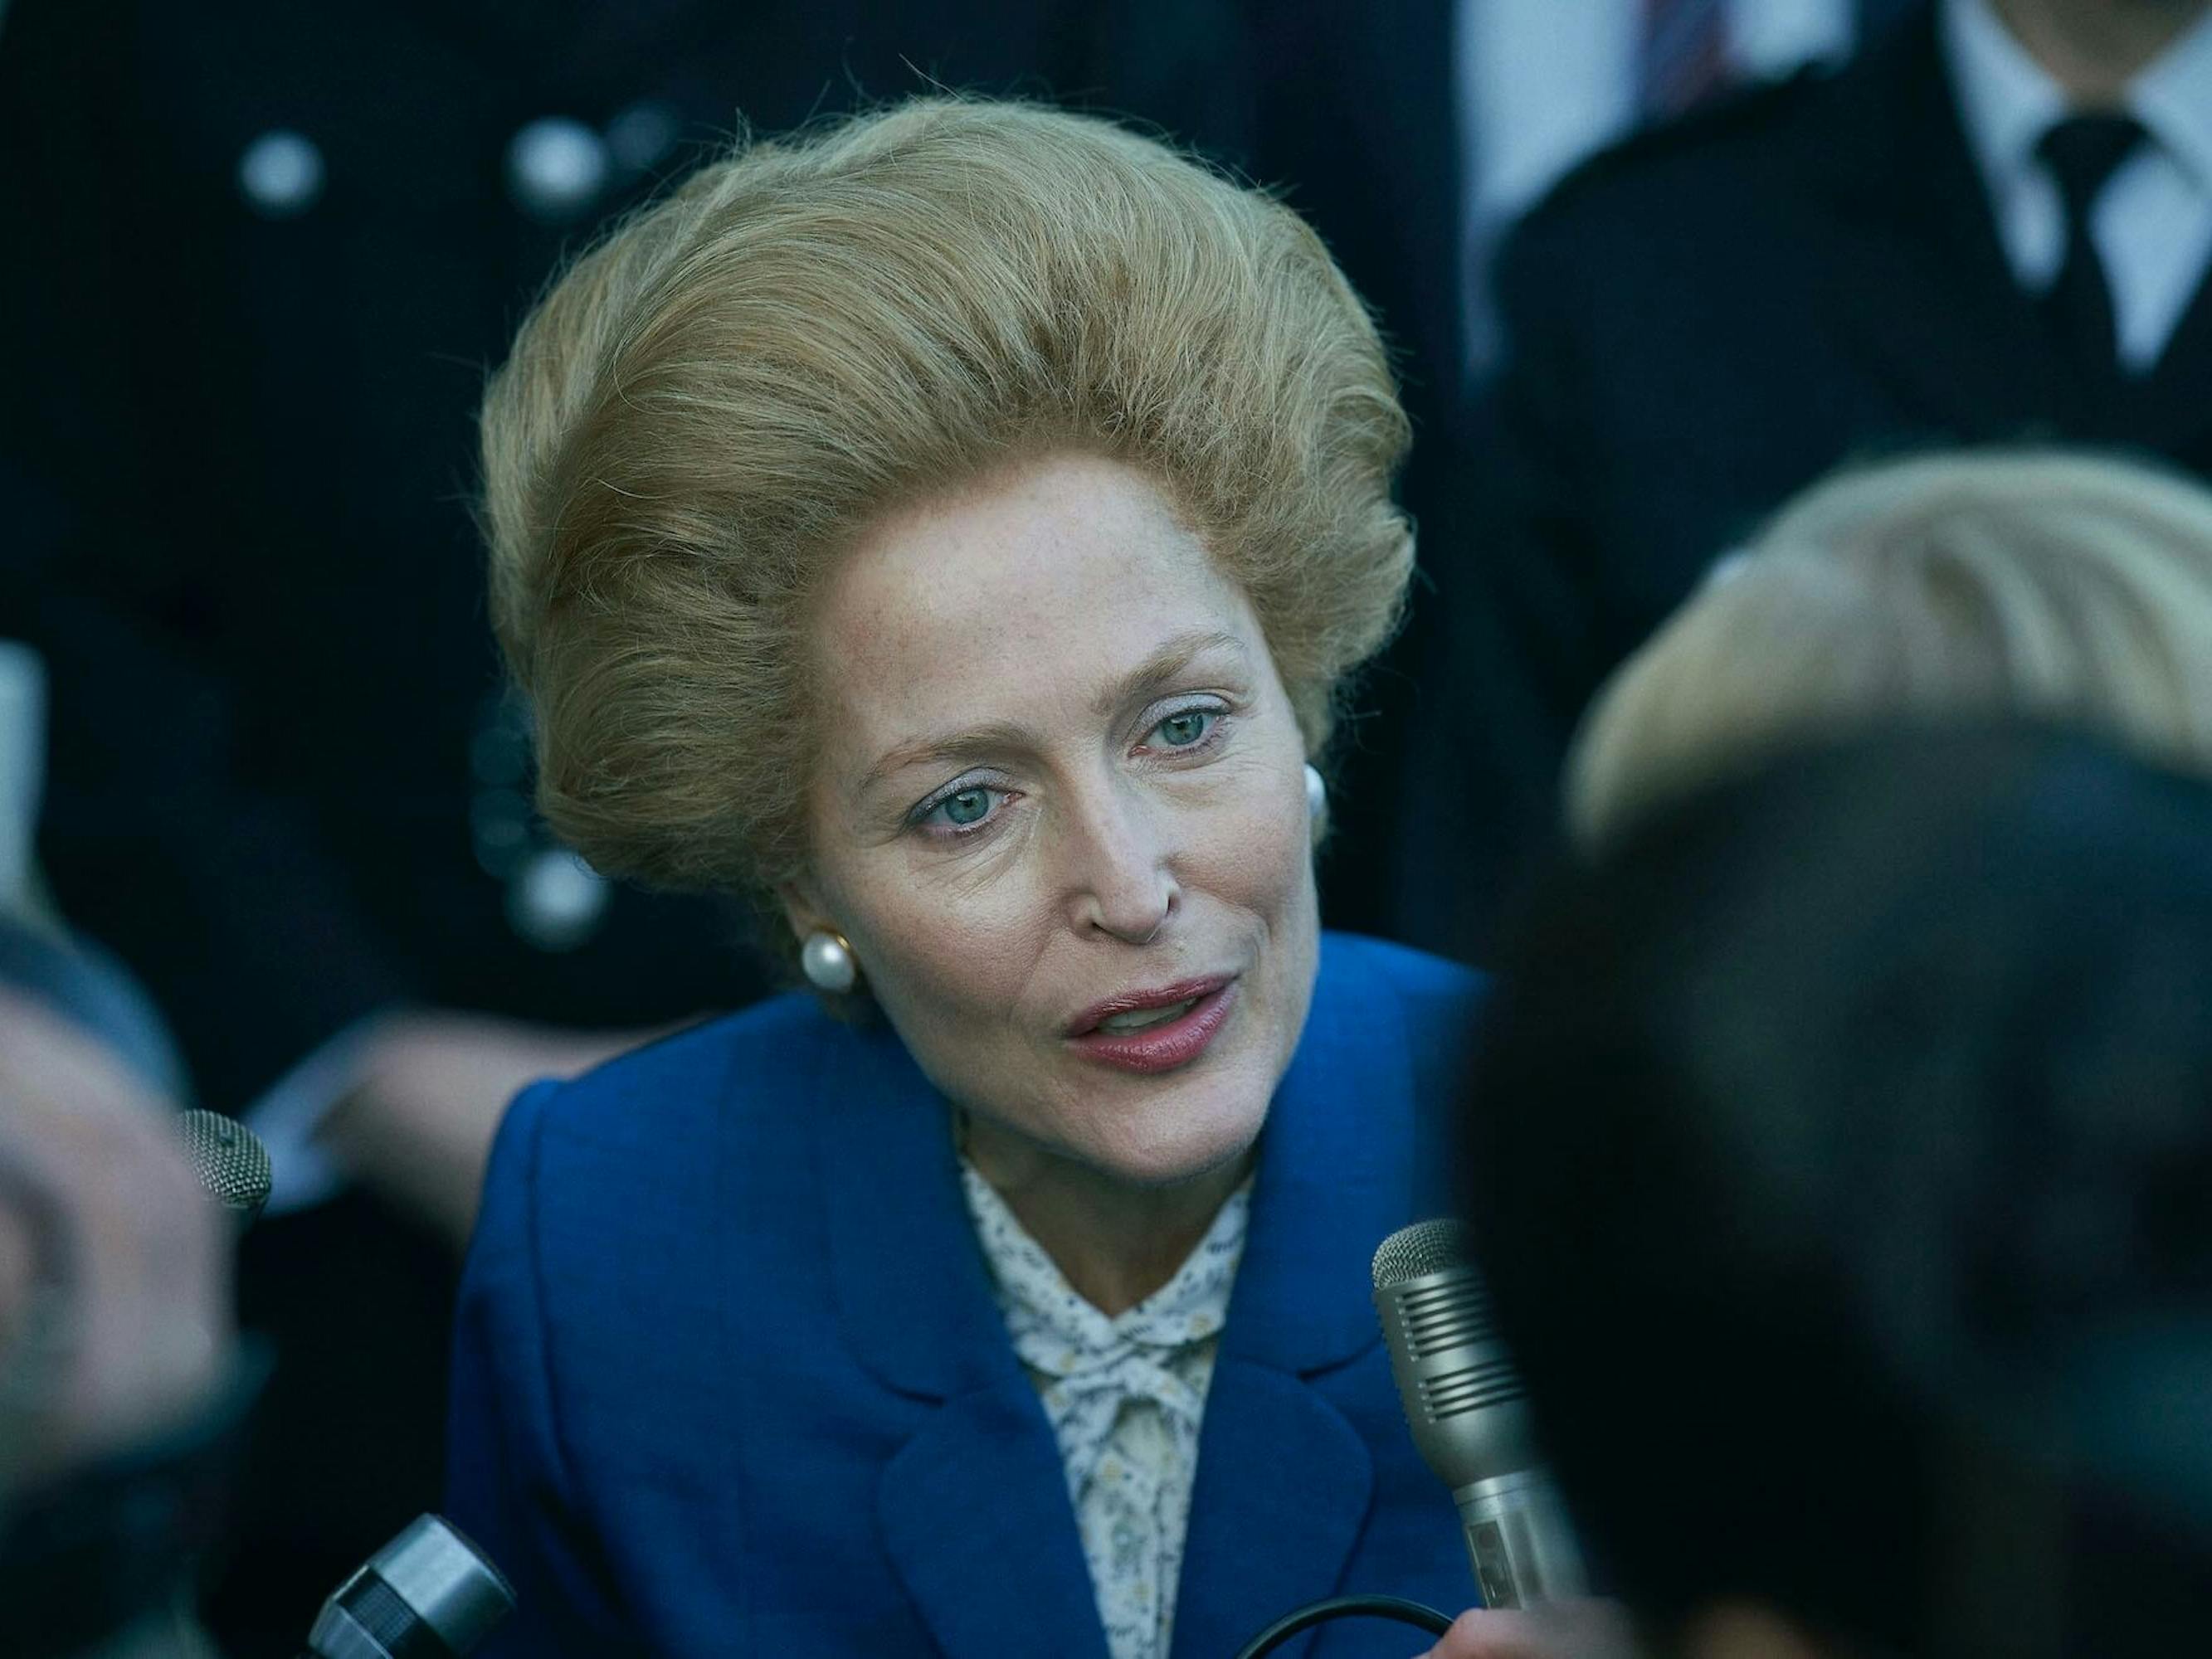 Margaret Thatcher (Gillian Anderson) speaks to reporters. Her blue eyes match her blazer perfectly, and her hair coiffed. Her pearl earrings swallow her ear lobes.